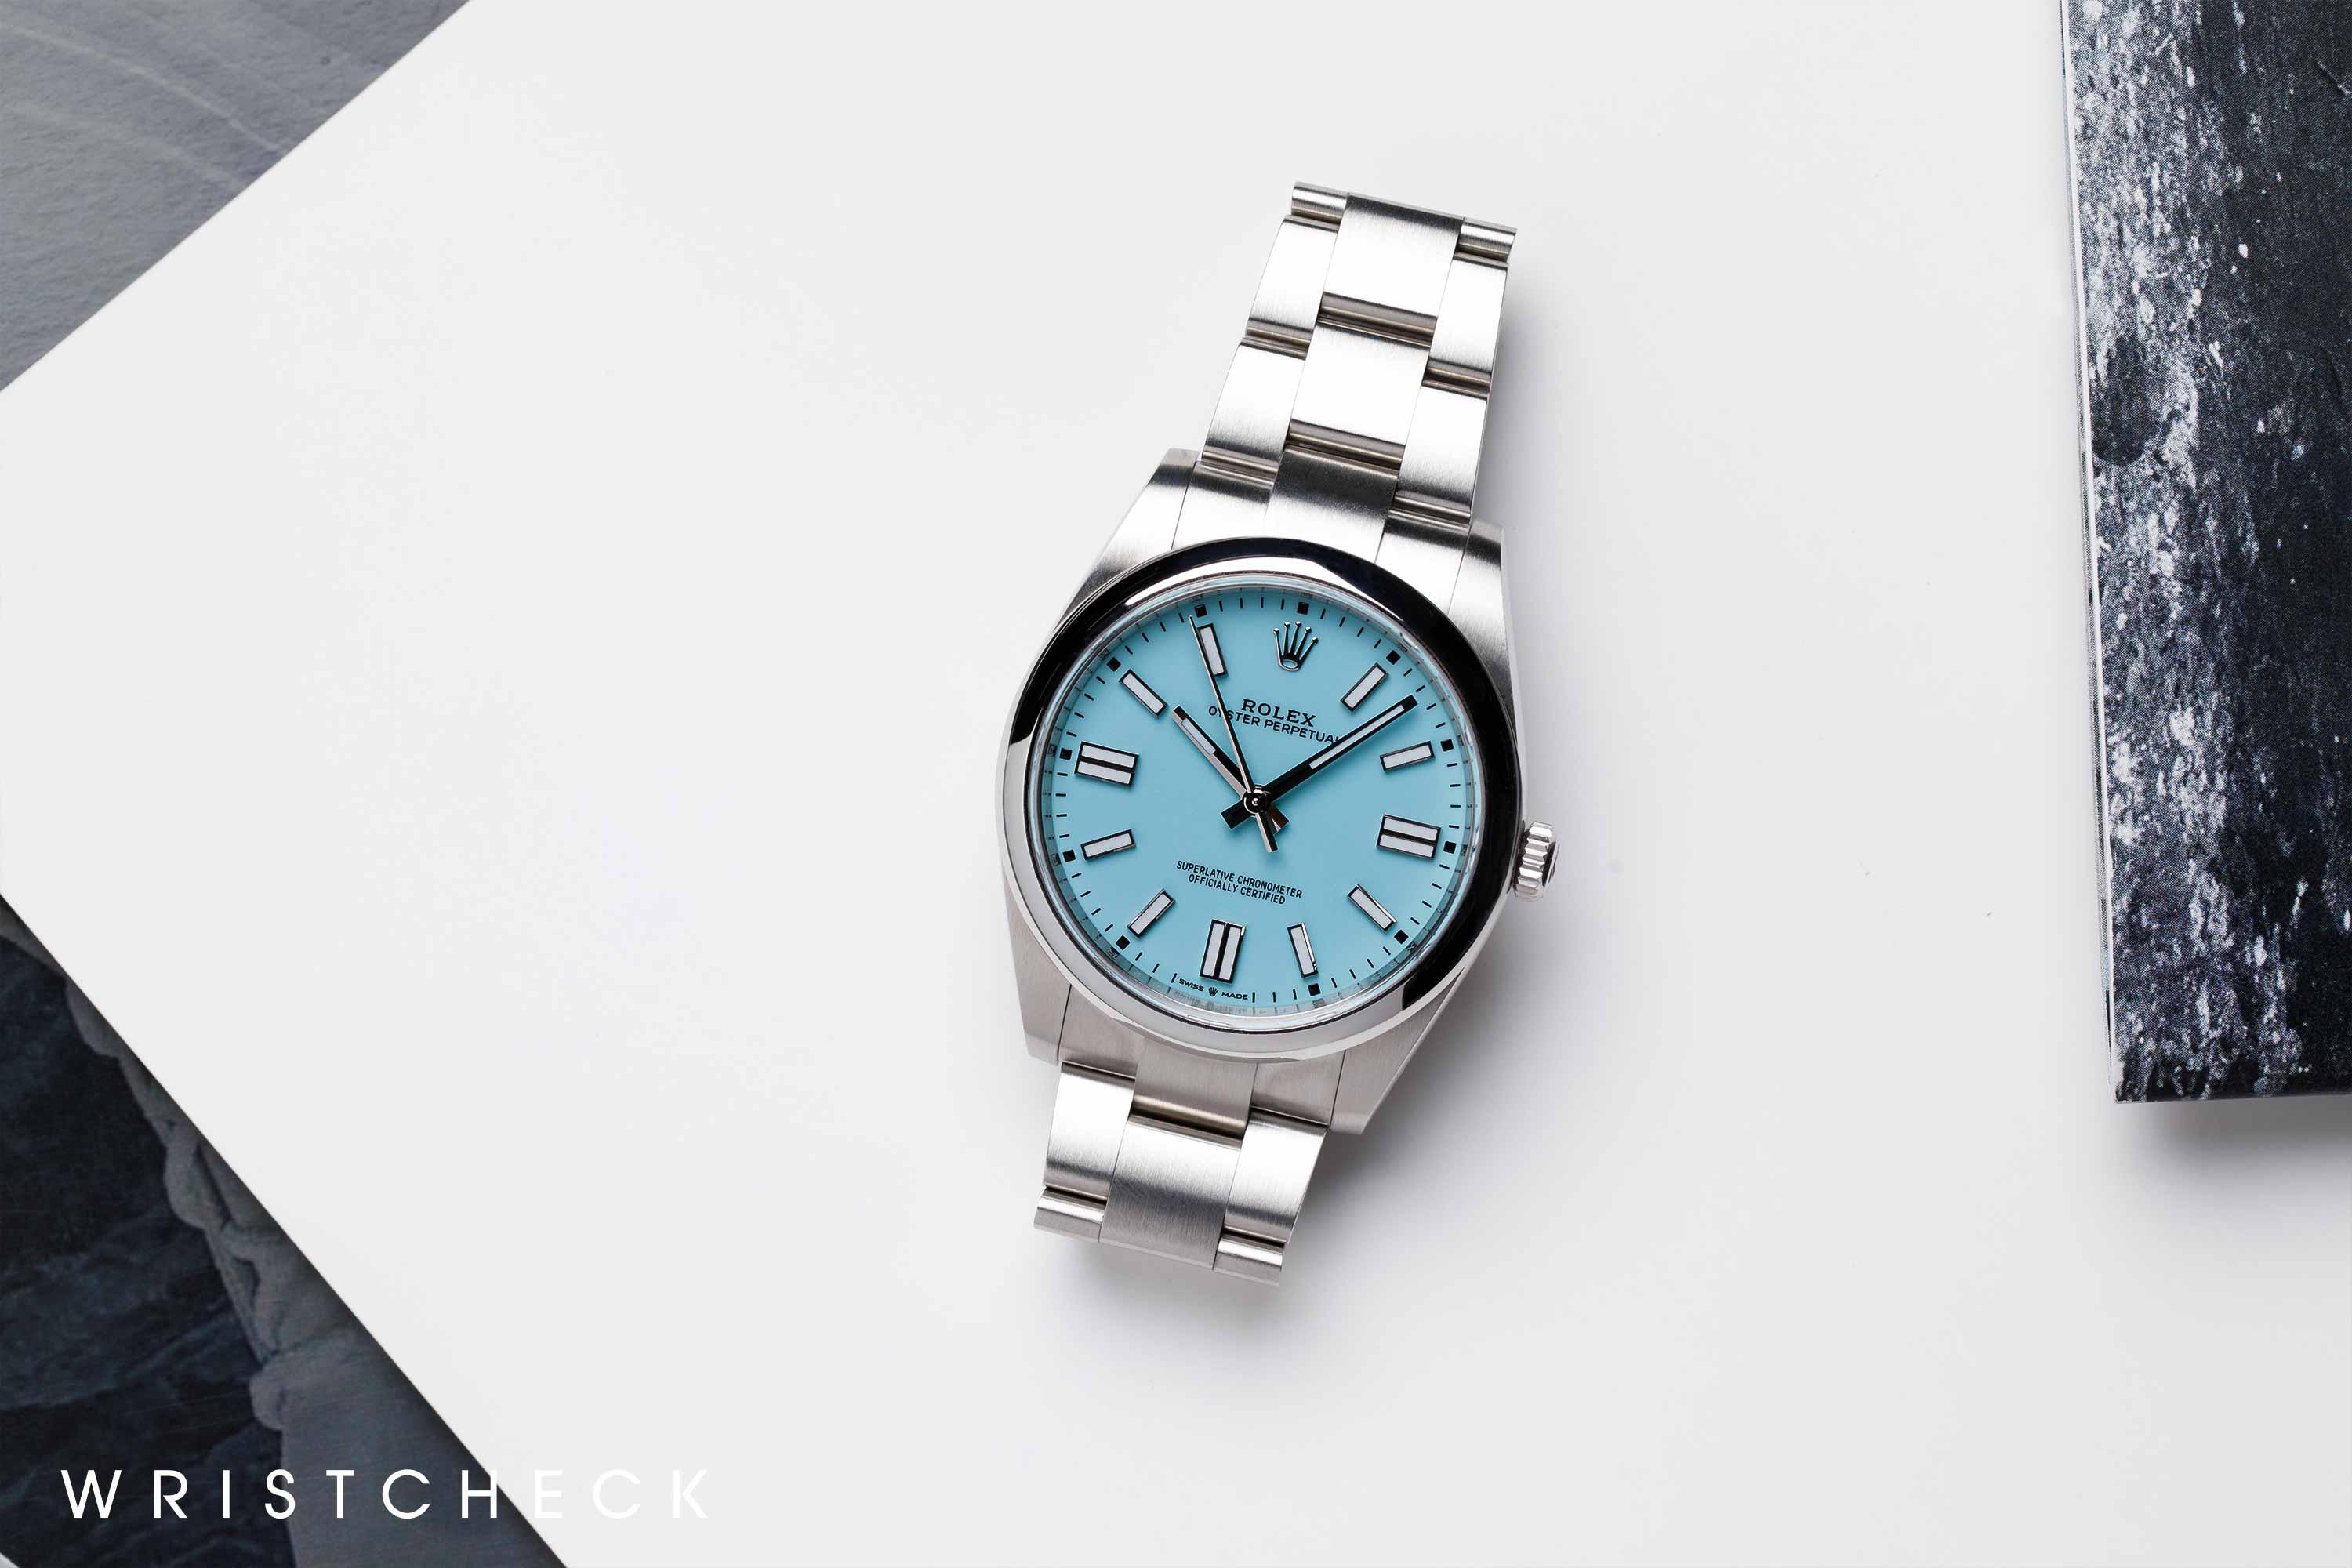 Rolex Oyster Perpetual in Turquoise